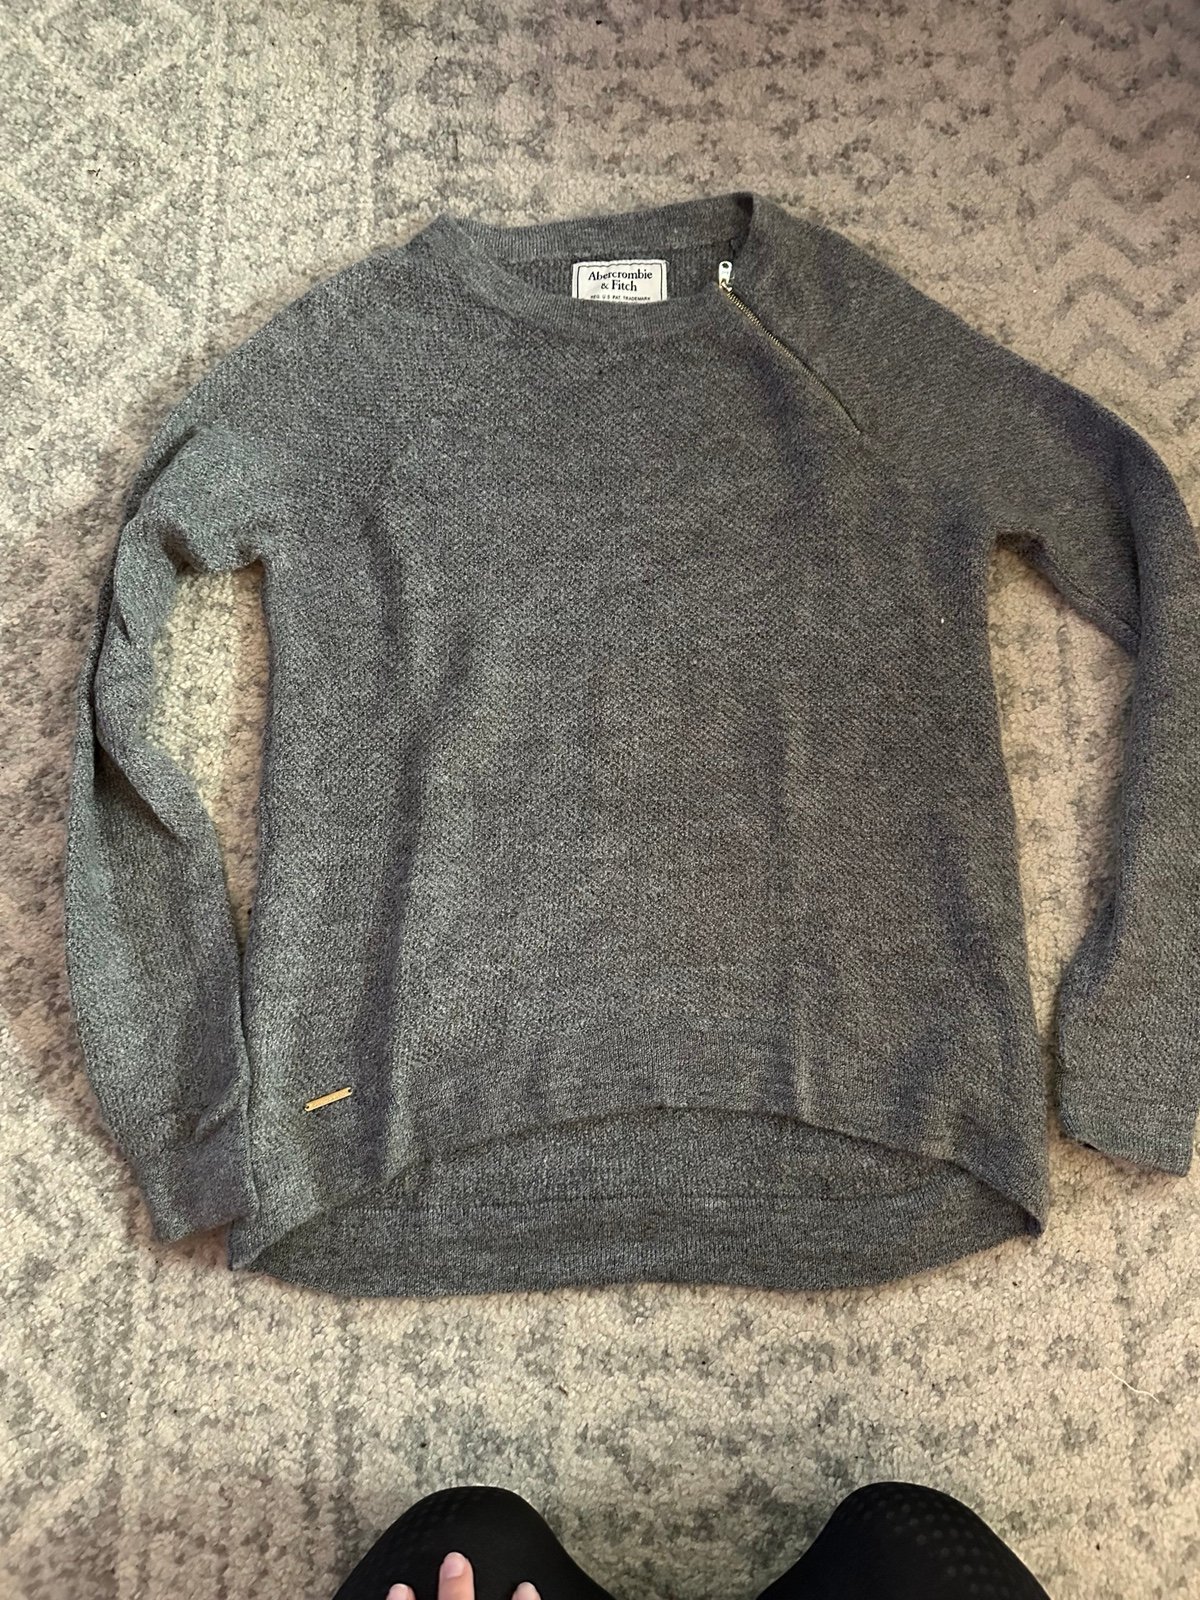 Simple Abercrombie gray knit sweater with zip detail p1I5mzMV6 Novel 